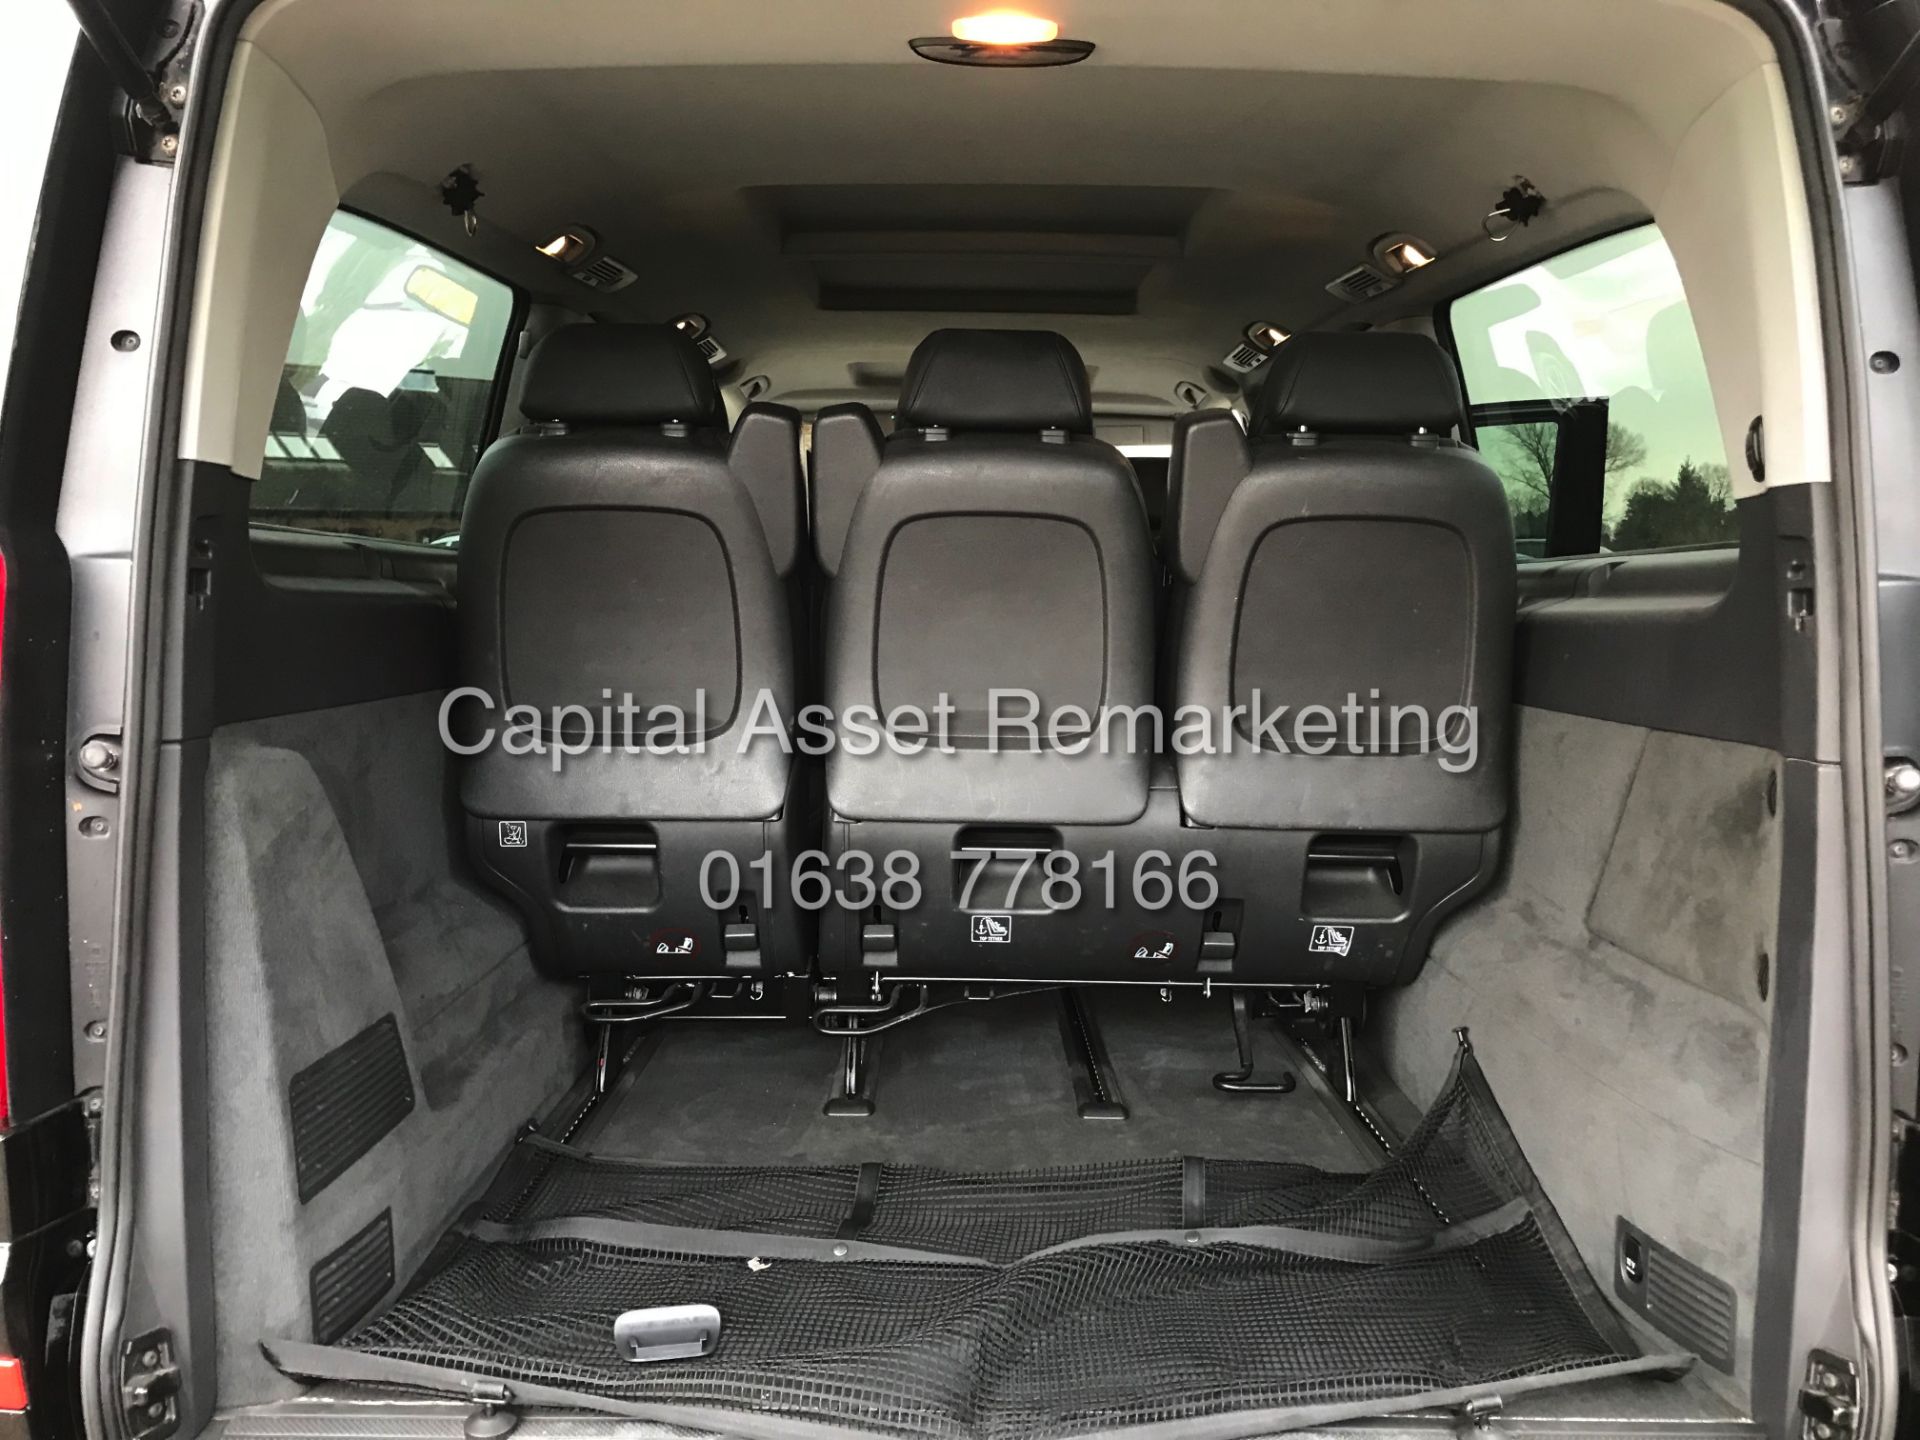 (ON SALE) MERCEDES VIANO 2.2CDI "AMBIENET" XLWB 8 SEATER (14 REG) 1 OWNER - FULLY LOADED - LEATHER - Image 25 of 28